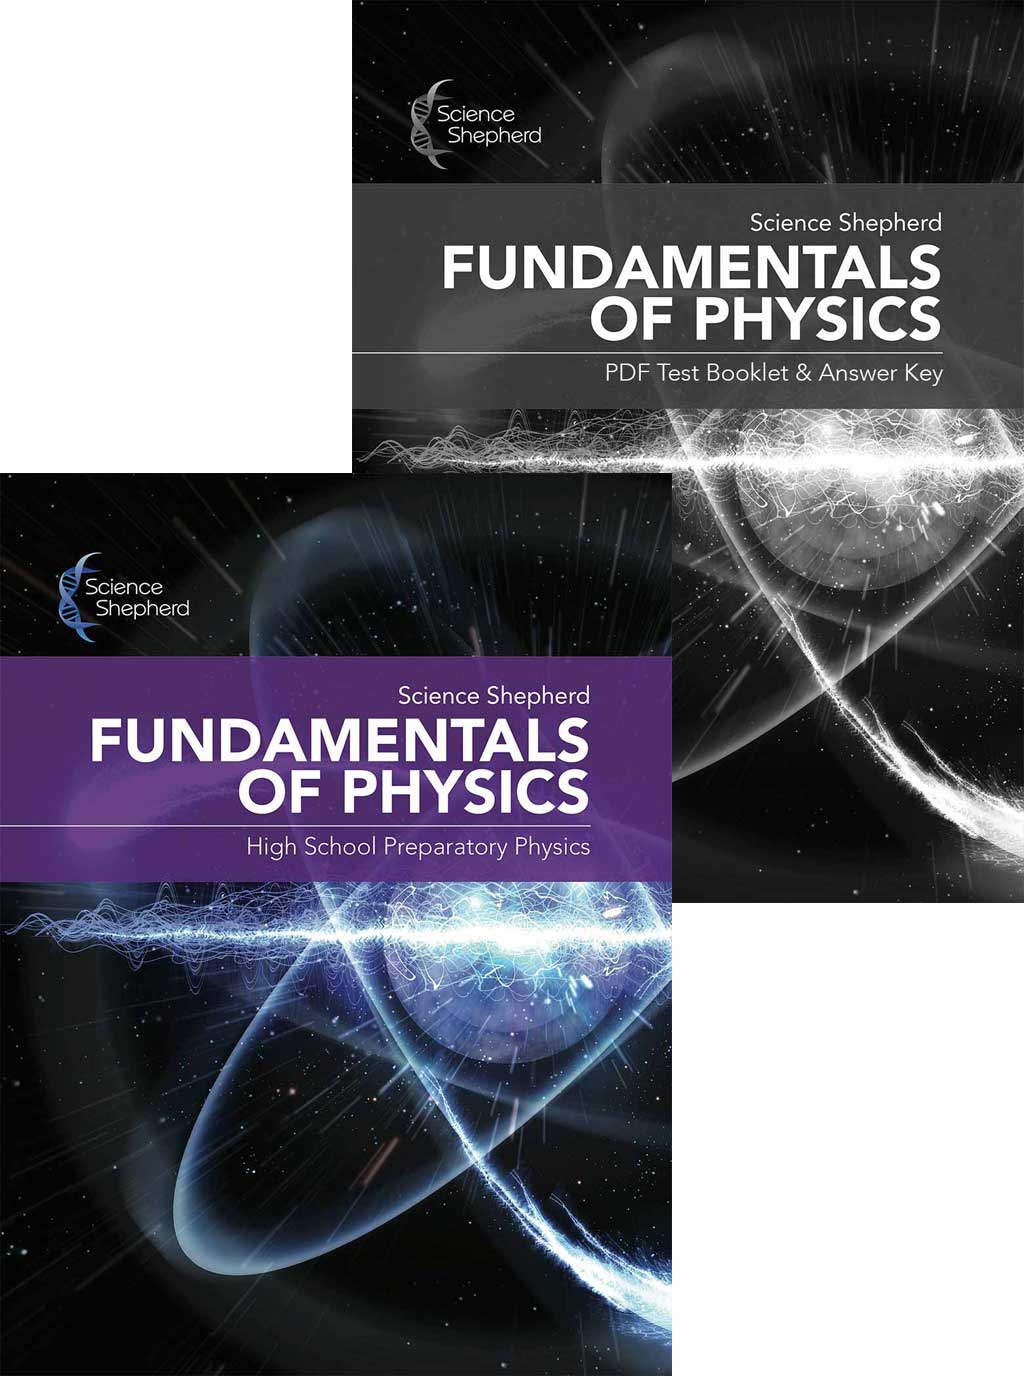 Science Shepherd homeschool physics curriculum bundle with textbook and test/answer key packet